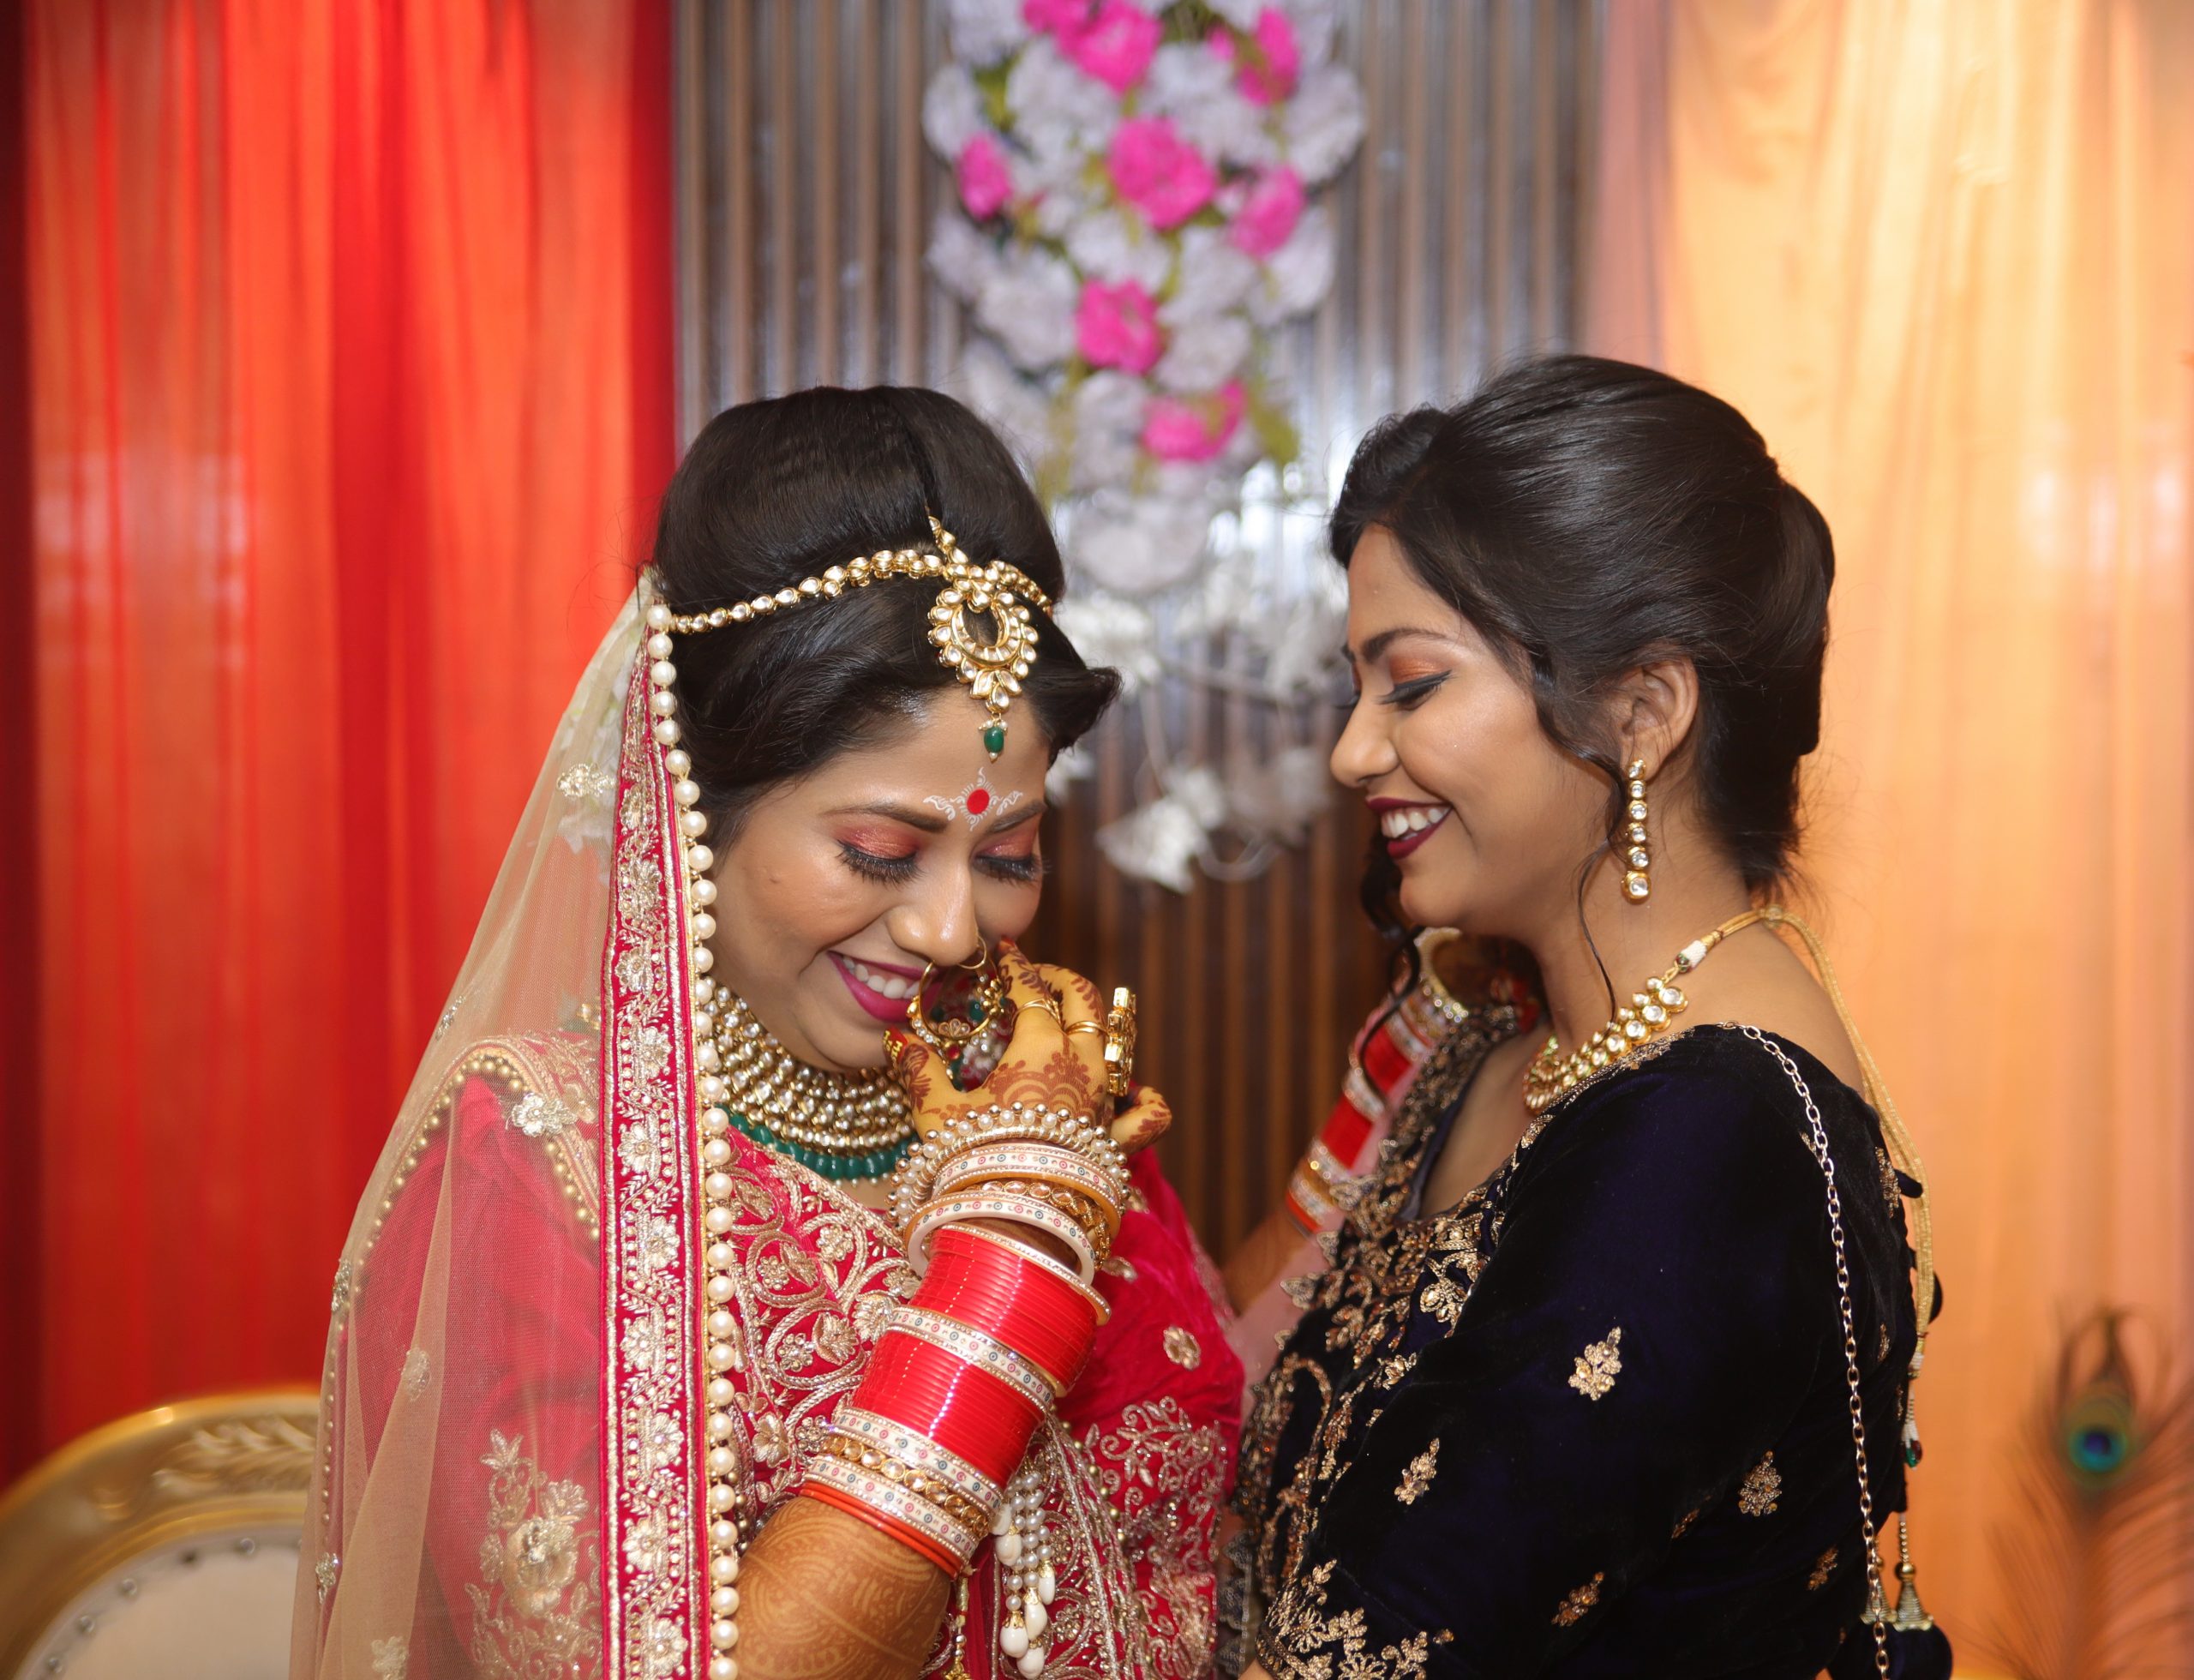 Indian bride with her friend